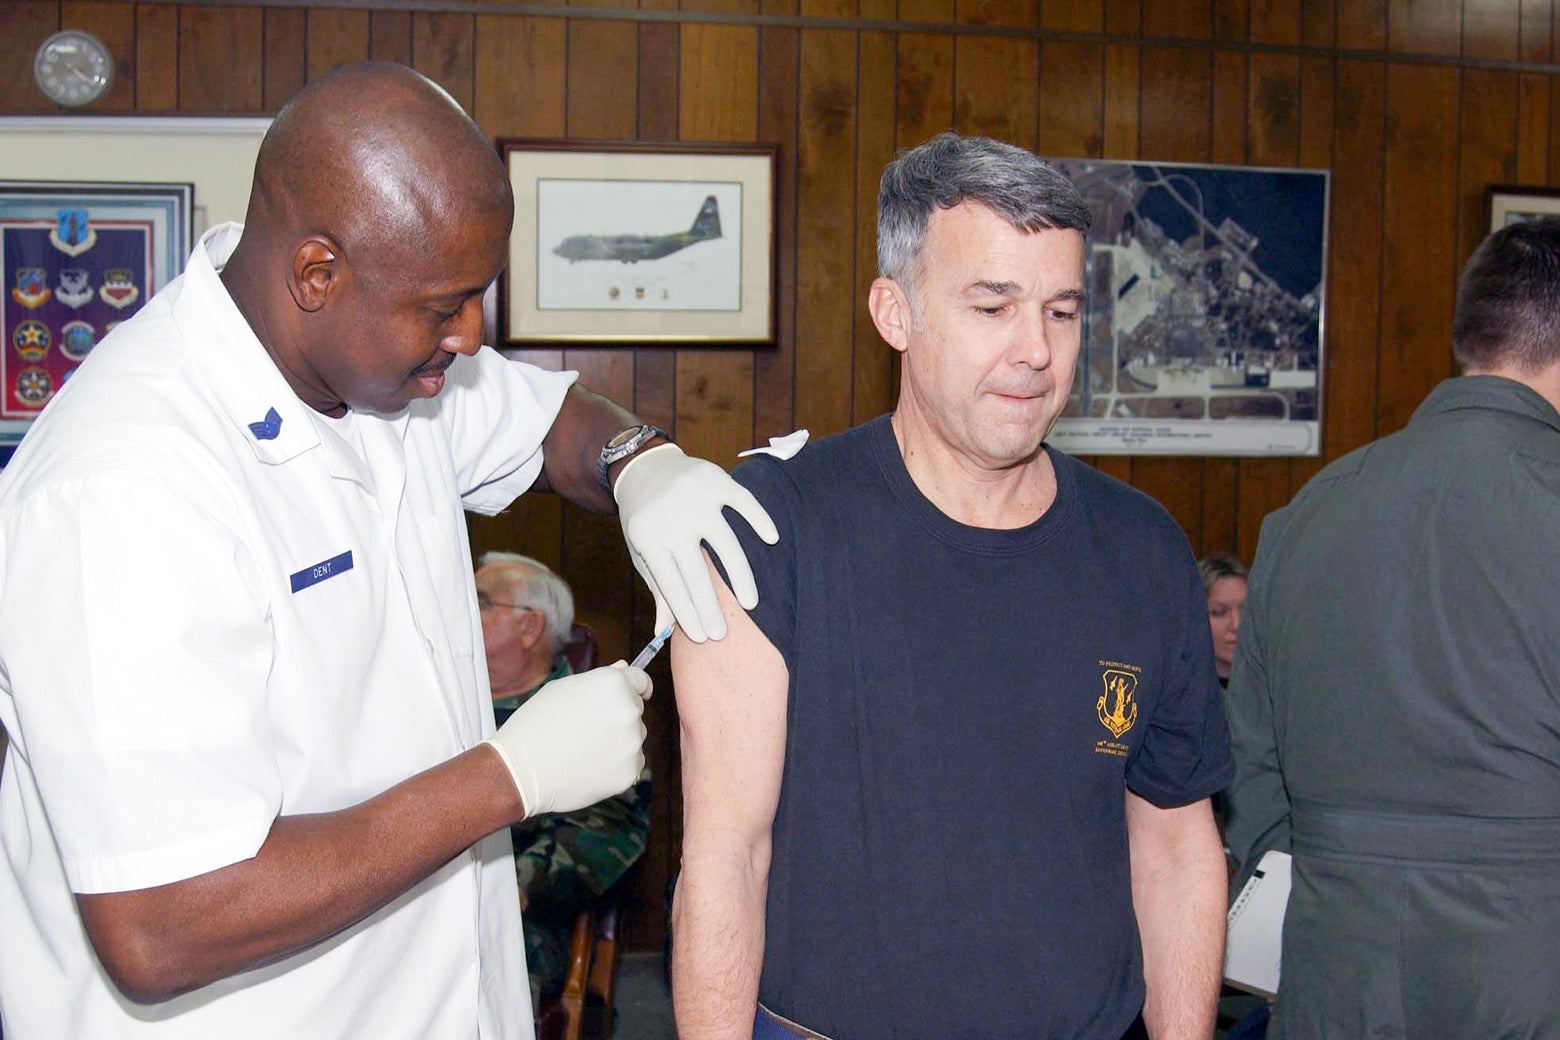 A man gets vaccinated by a health care worker.